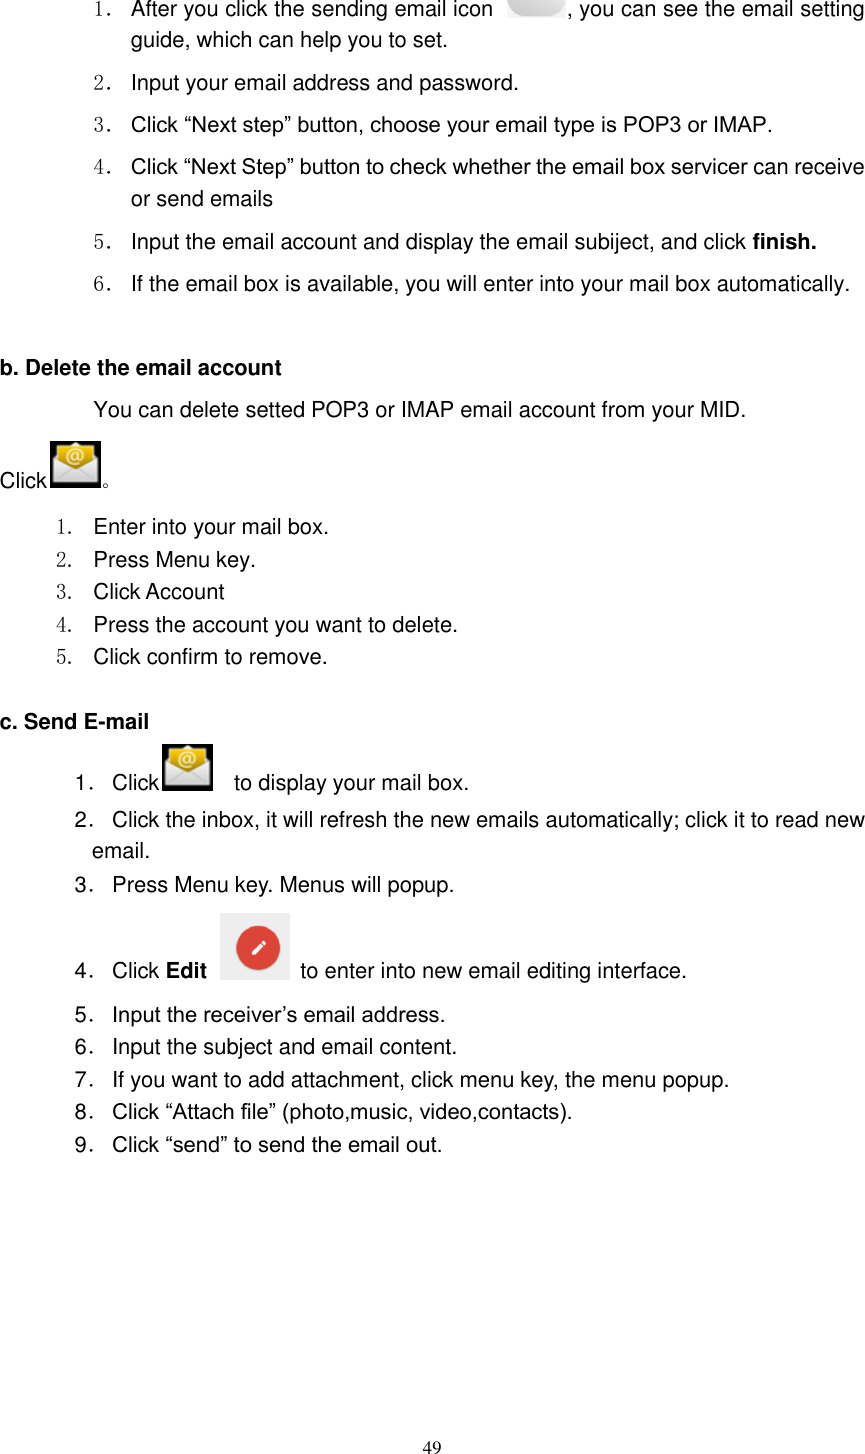      49 1． After you click the sending email icon  , you can see the email setting guide, which can help you to set.   2． Input your email address and password. 3． Click “Next step” button, choose your email type is POP3 or IMAP. 4． Click “Next Step” button to check whether the email box servicer can receive or send emails 5． Input the email account and display the email subiject, and click finish. 6． If the email box is available, you will enter into your mail box automatically.  b. Delete the email account You can delete setted POP3 or IMAP email account from your MID. Click 。 1.  Enter into your mail box. 2.  Press Menu key. 3.  Click Account 4.  Press the account you want to delete. 5.  Click confirm to remove.  c. Send E-mail 1． Click   to display your mail box. 2． Click the inbox, it will refresh the new emails automatically; click it to read new email. 3． Press Menu key. Menus will popup. 4． Click Edit    to enter into new email editing interface. 5． Input the receiver’s email address.   6． Input the subject and email content. 7． If you want to add attachment, click menu key, the menu popup. 8． Click “Attach file” (photo,music, video,contacts). 9． Click “send” to send the email out. 